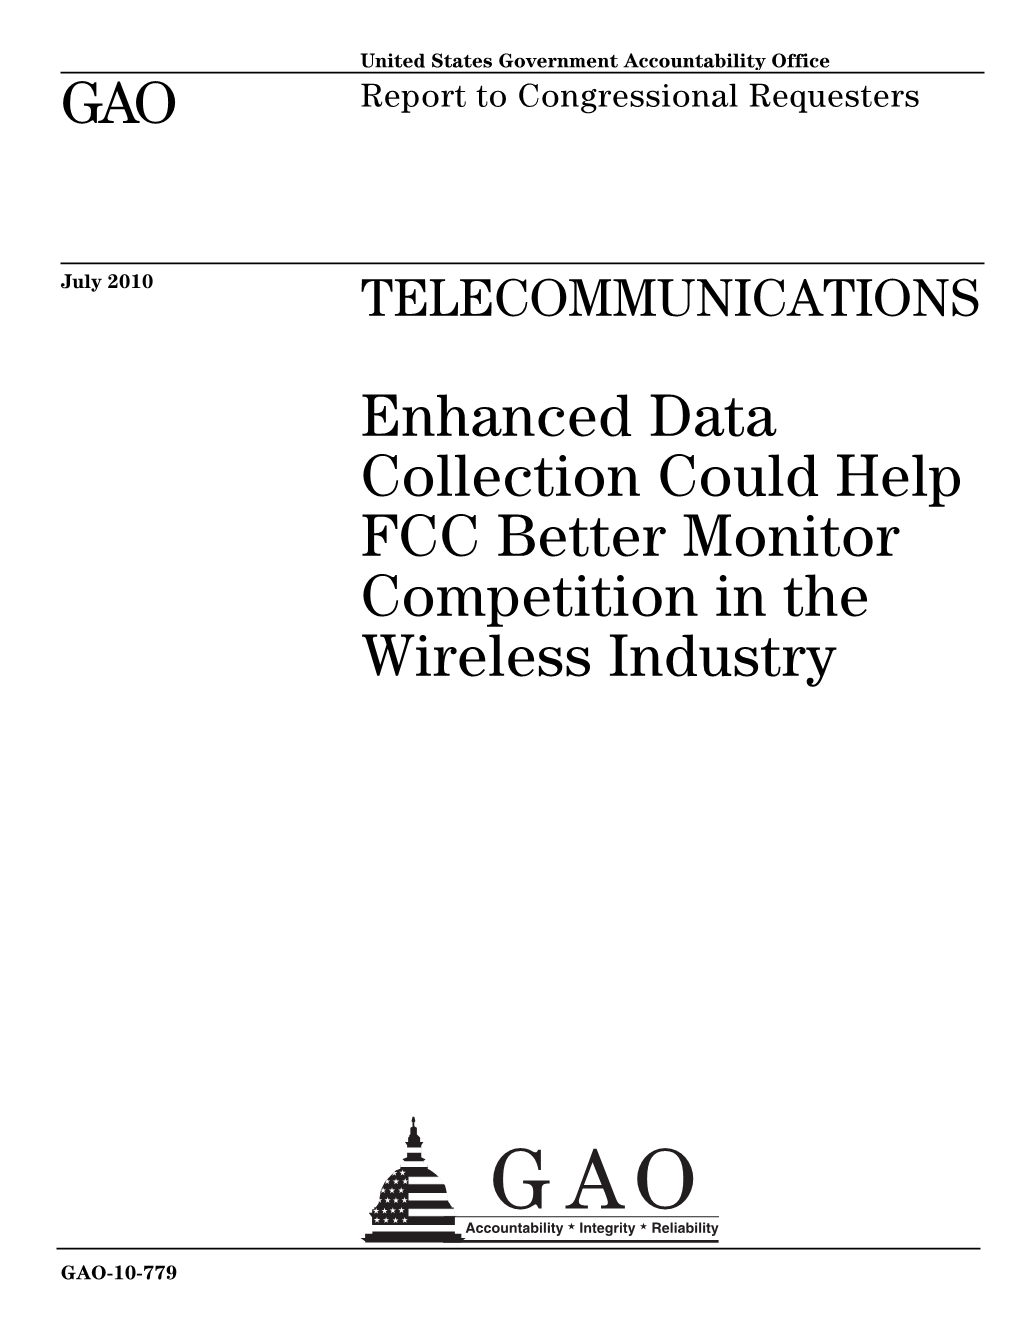 GAO-10-779 Telecommunications: Enhanced Data Collection Could